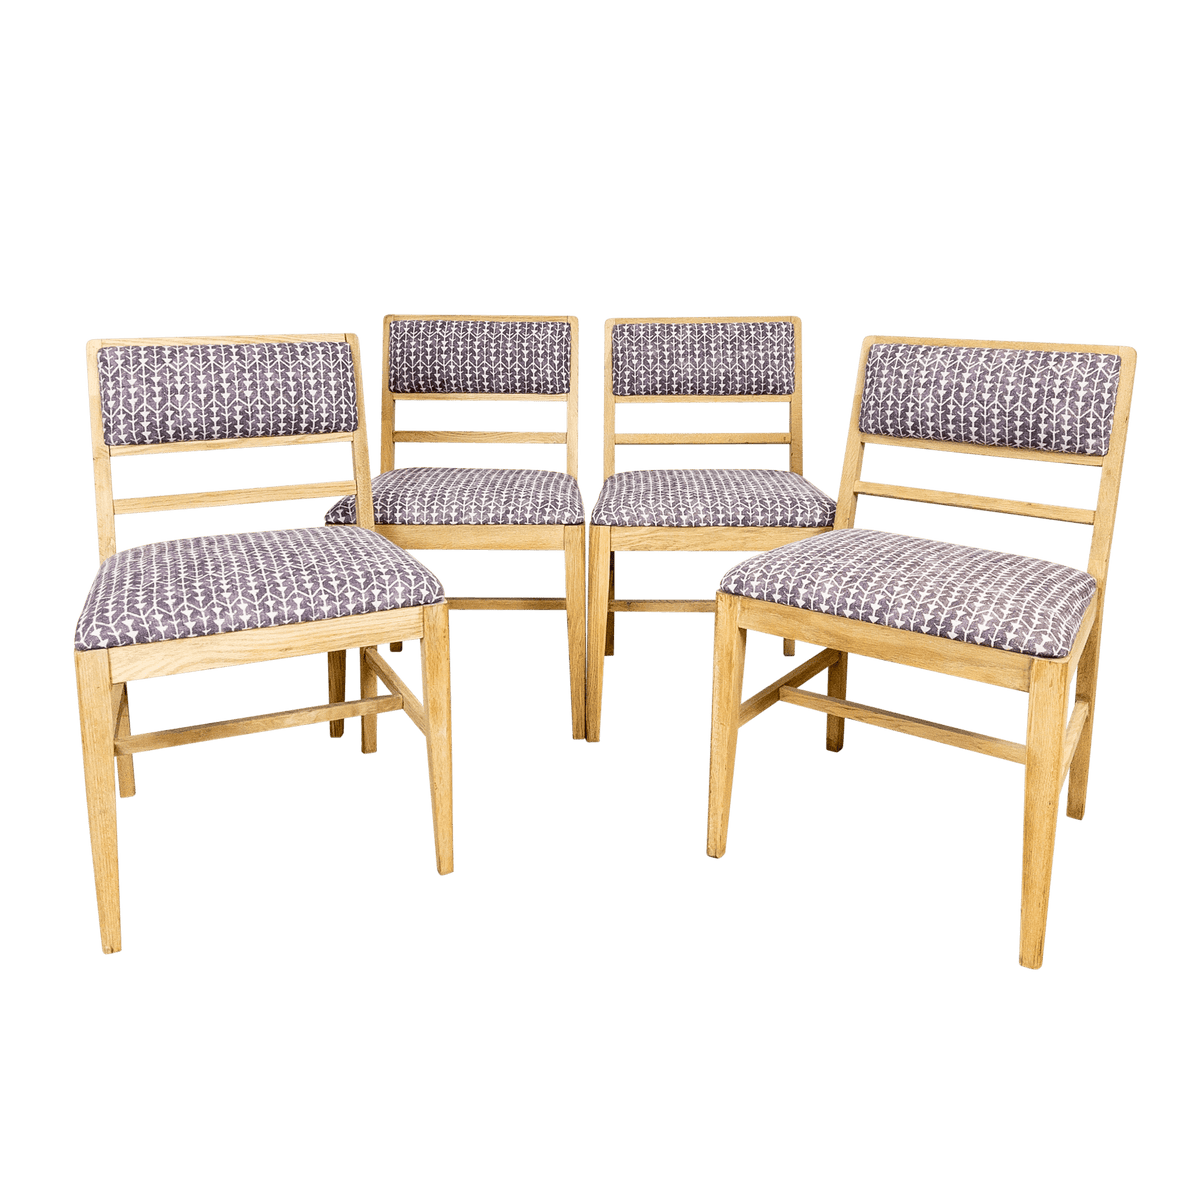 Ruthie Chairs - Set of 4